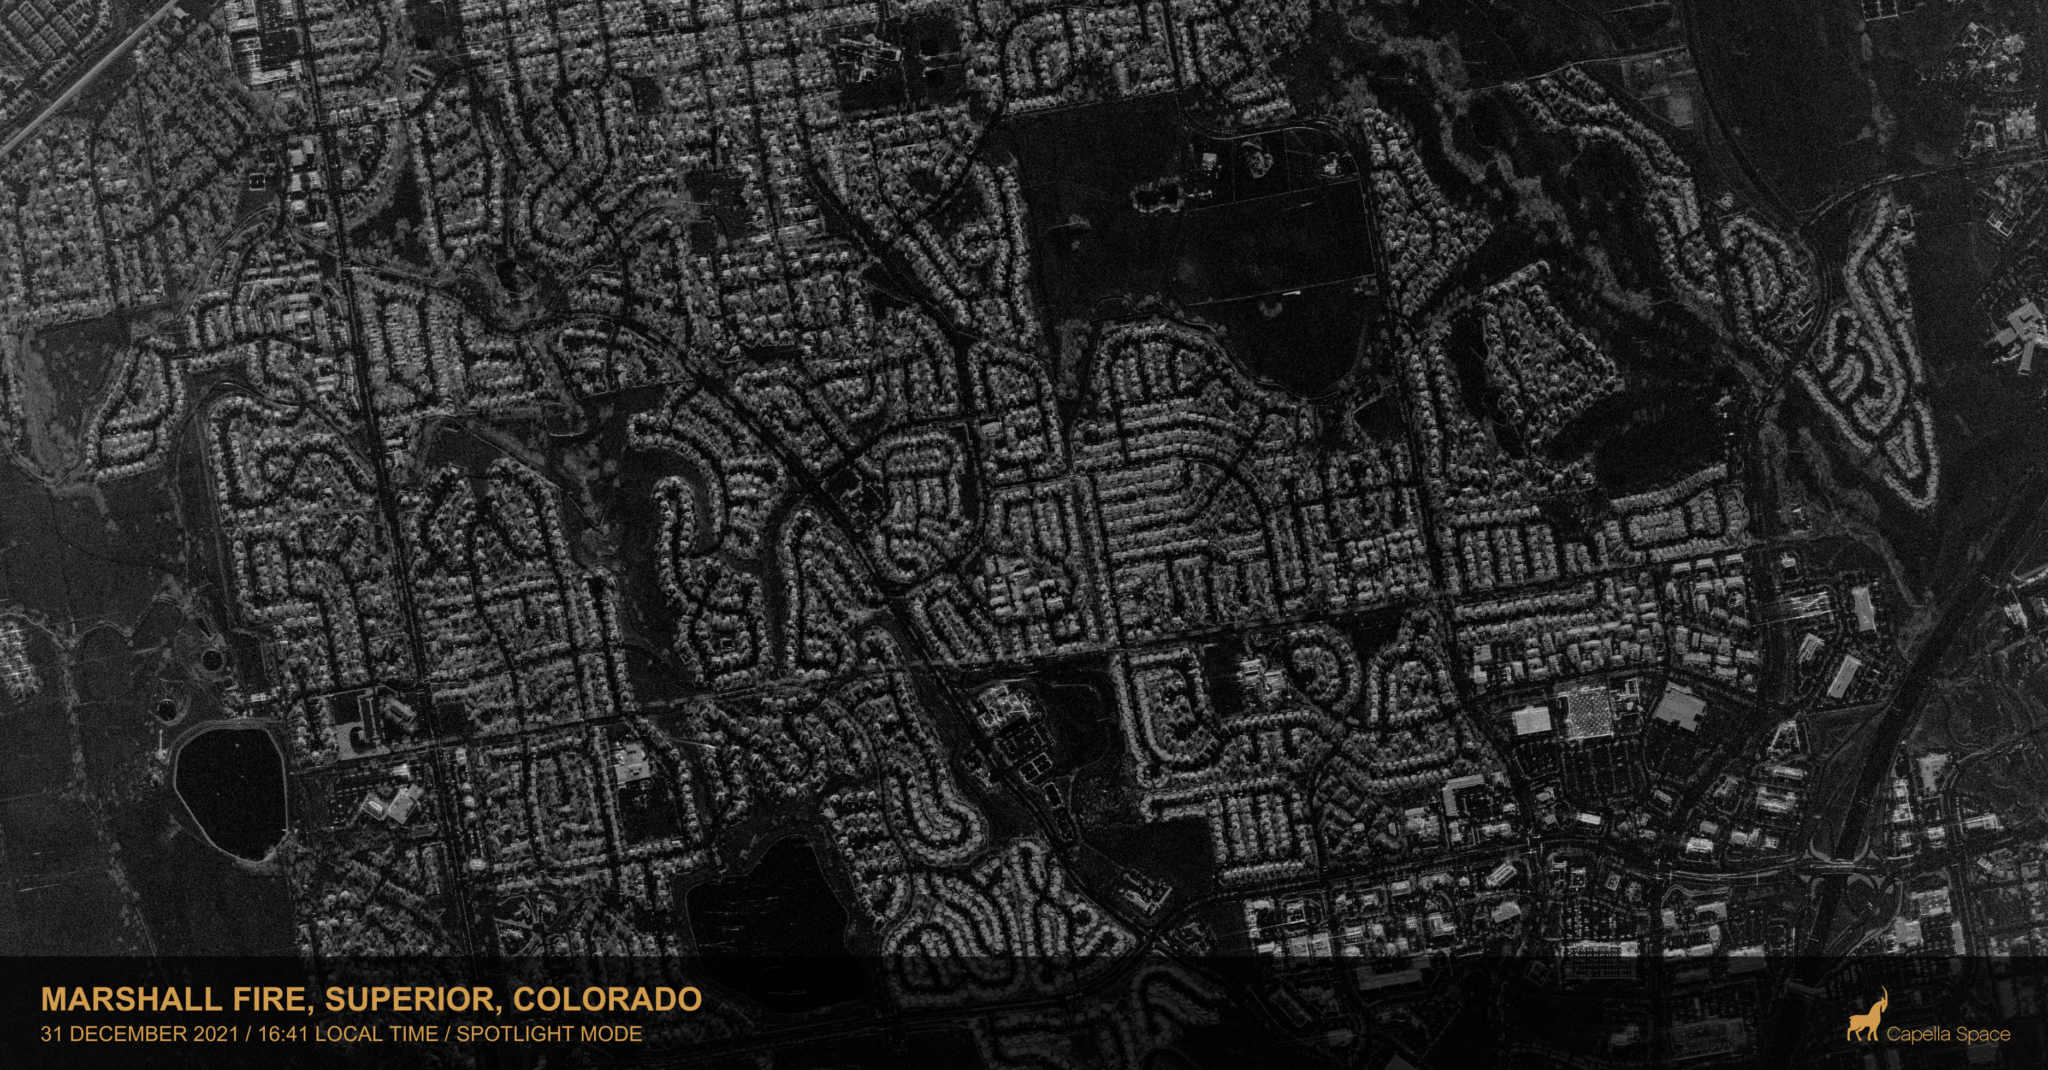 Colorado Marshal Fire in SAR imagery